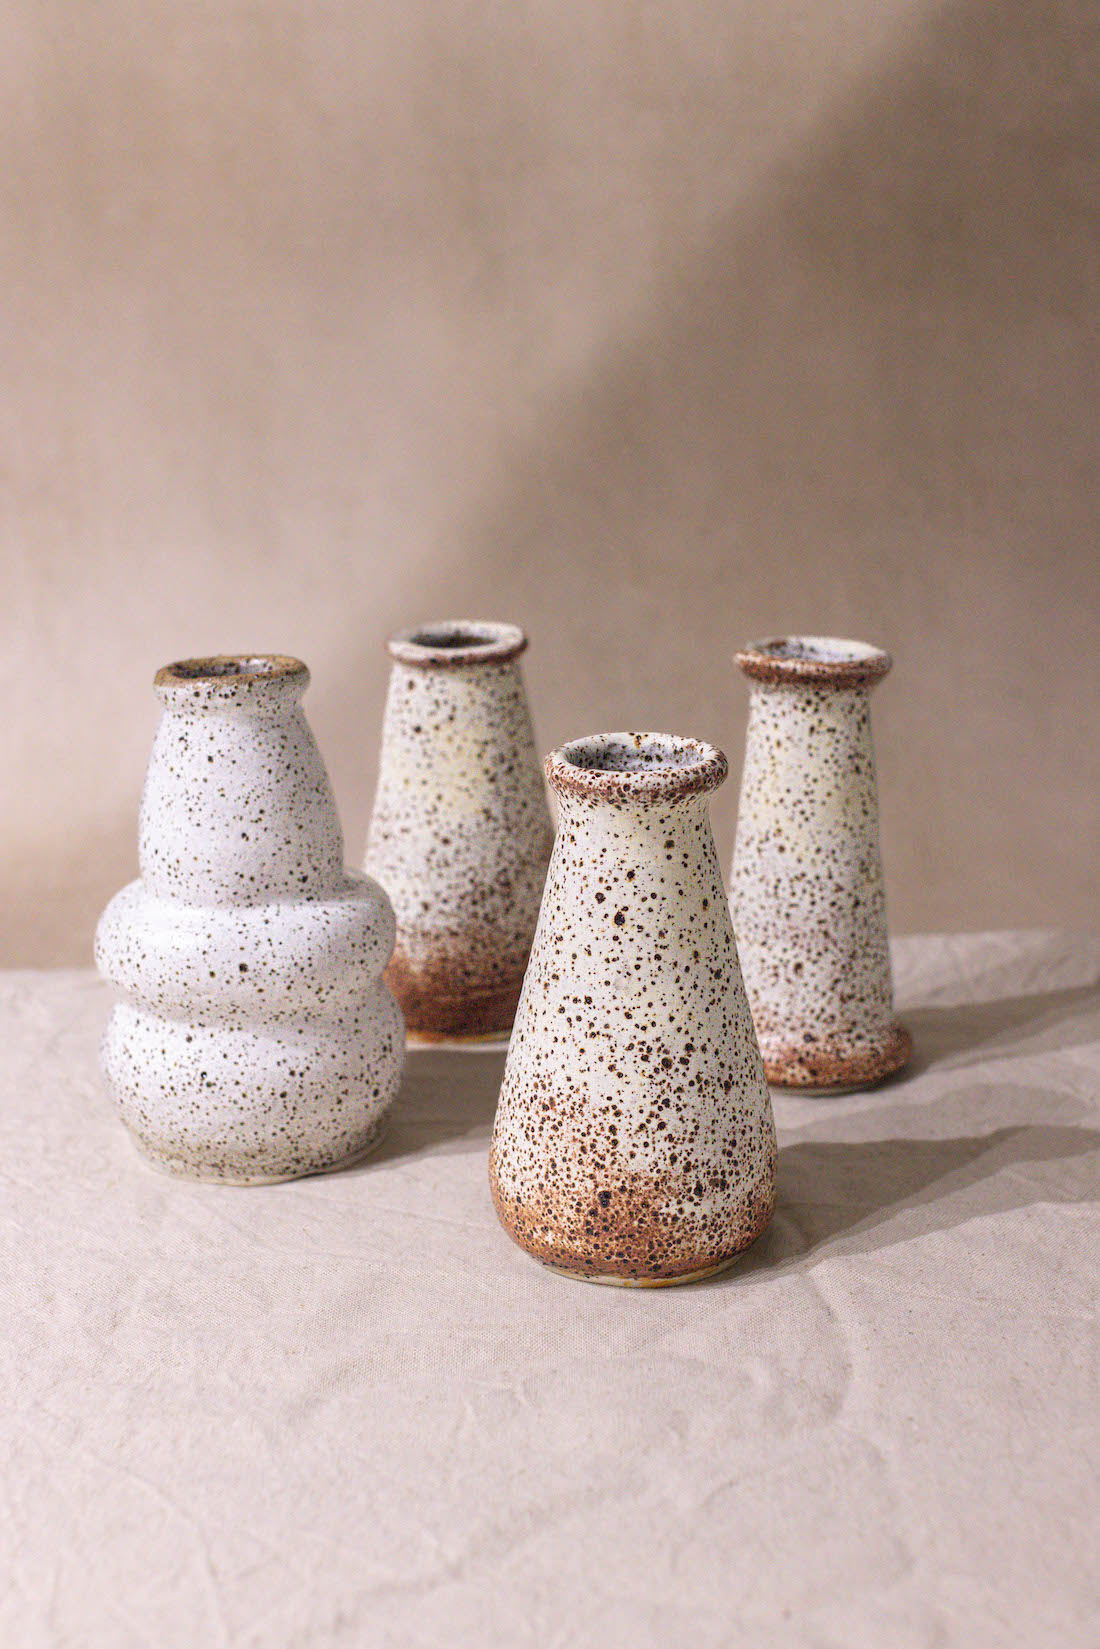 Airr Made Ceramics collection of handmade vases